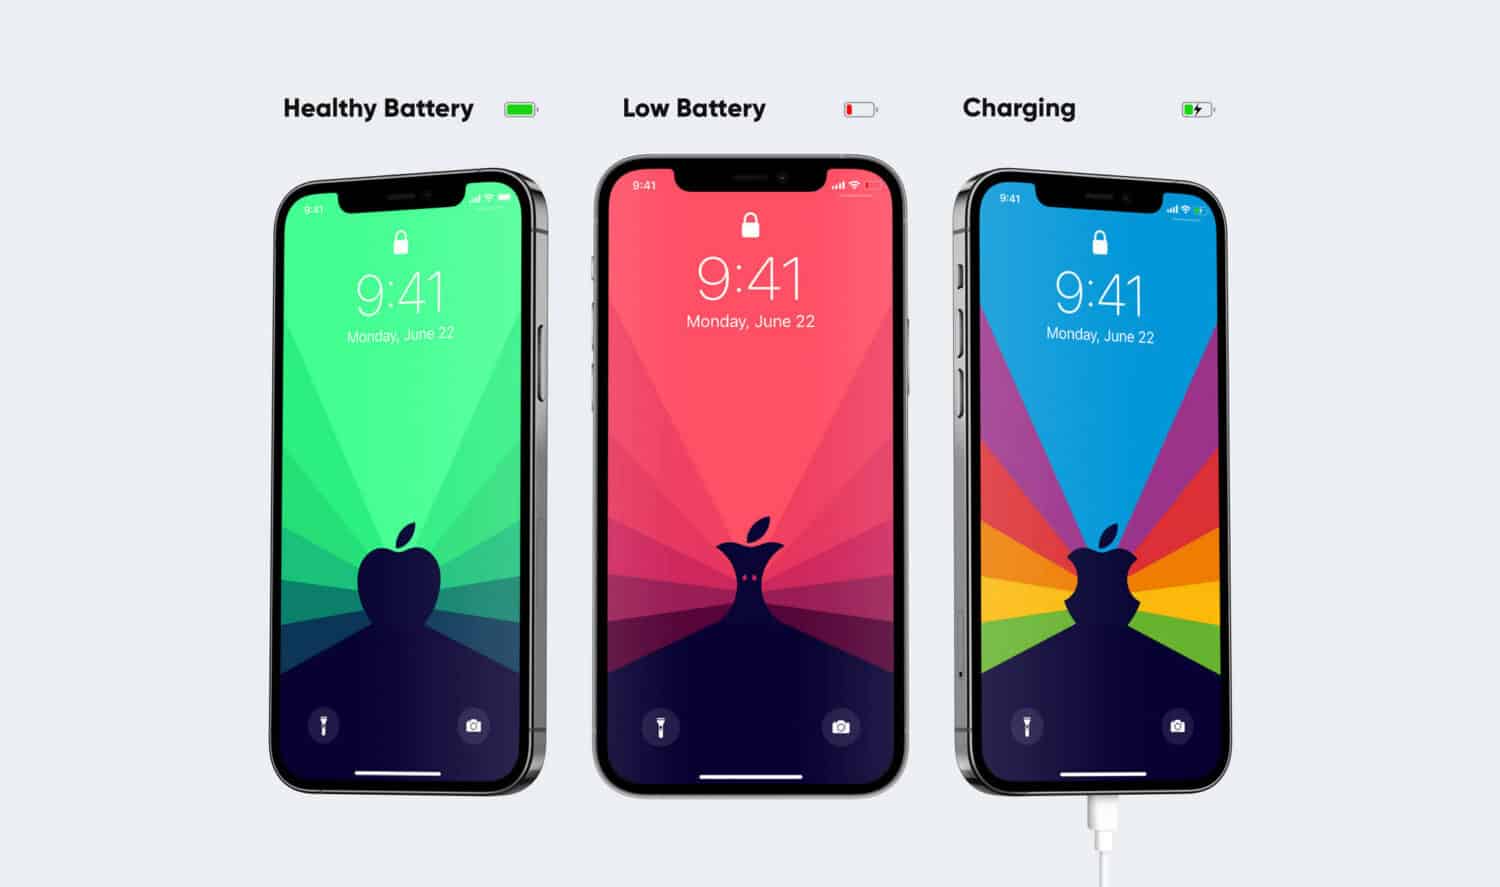 iPhone: wallpapers that change depending on the battery level